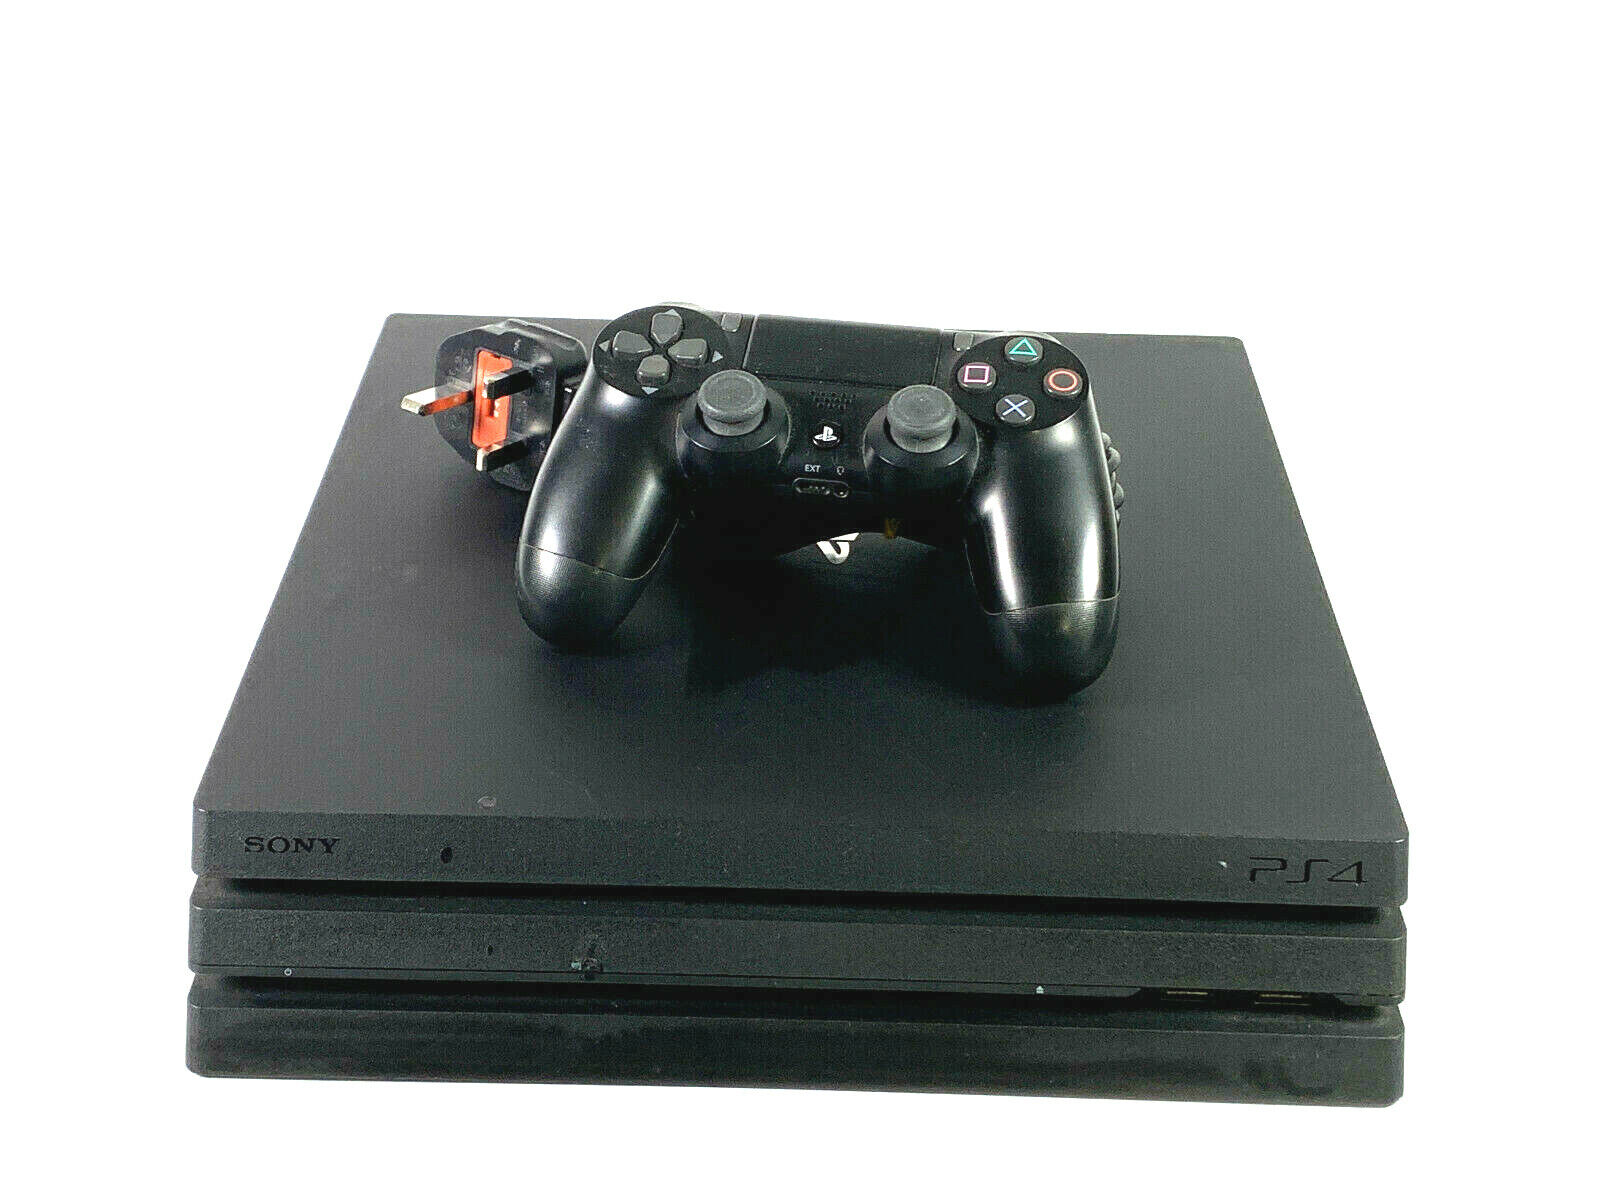 Sony Playstation 4 Pro 1TB Game Console - Black (CUH-7016B) for 